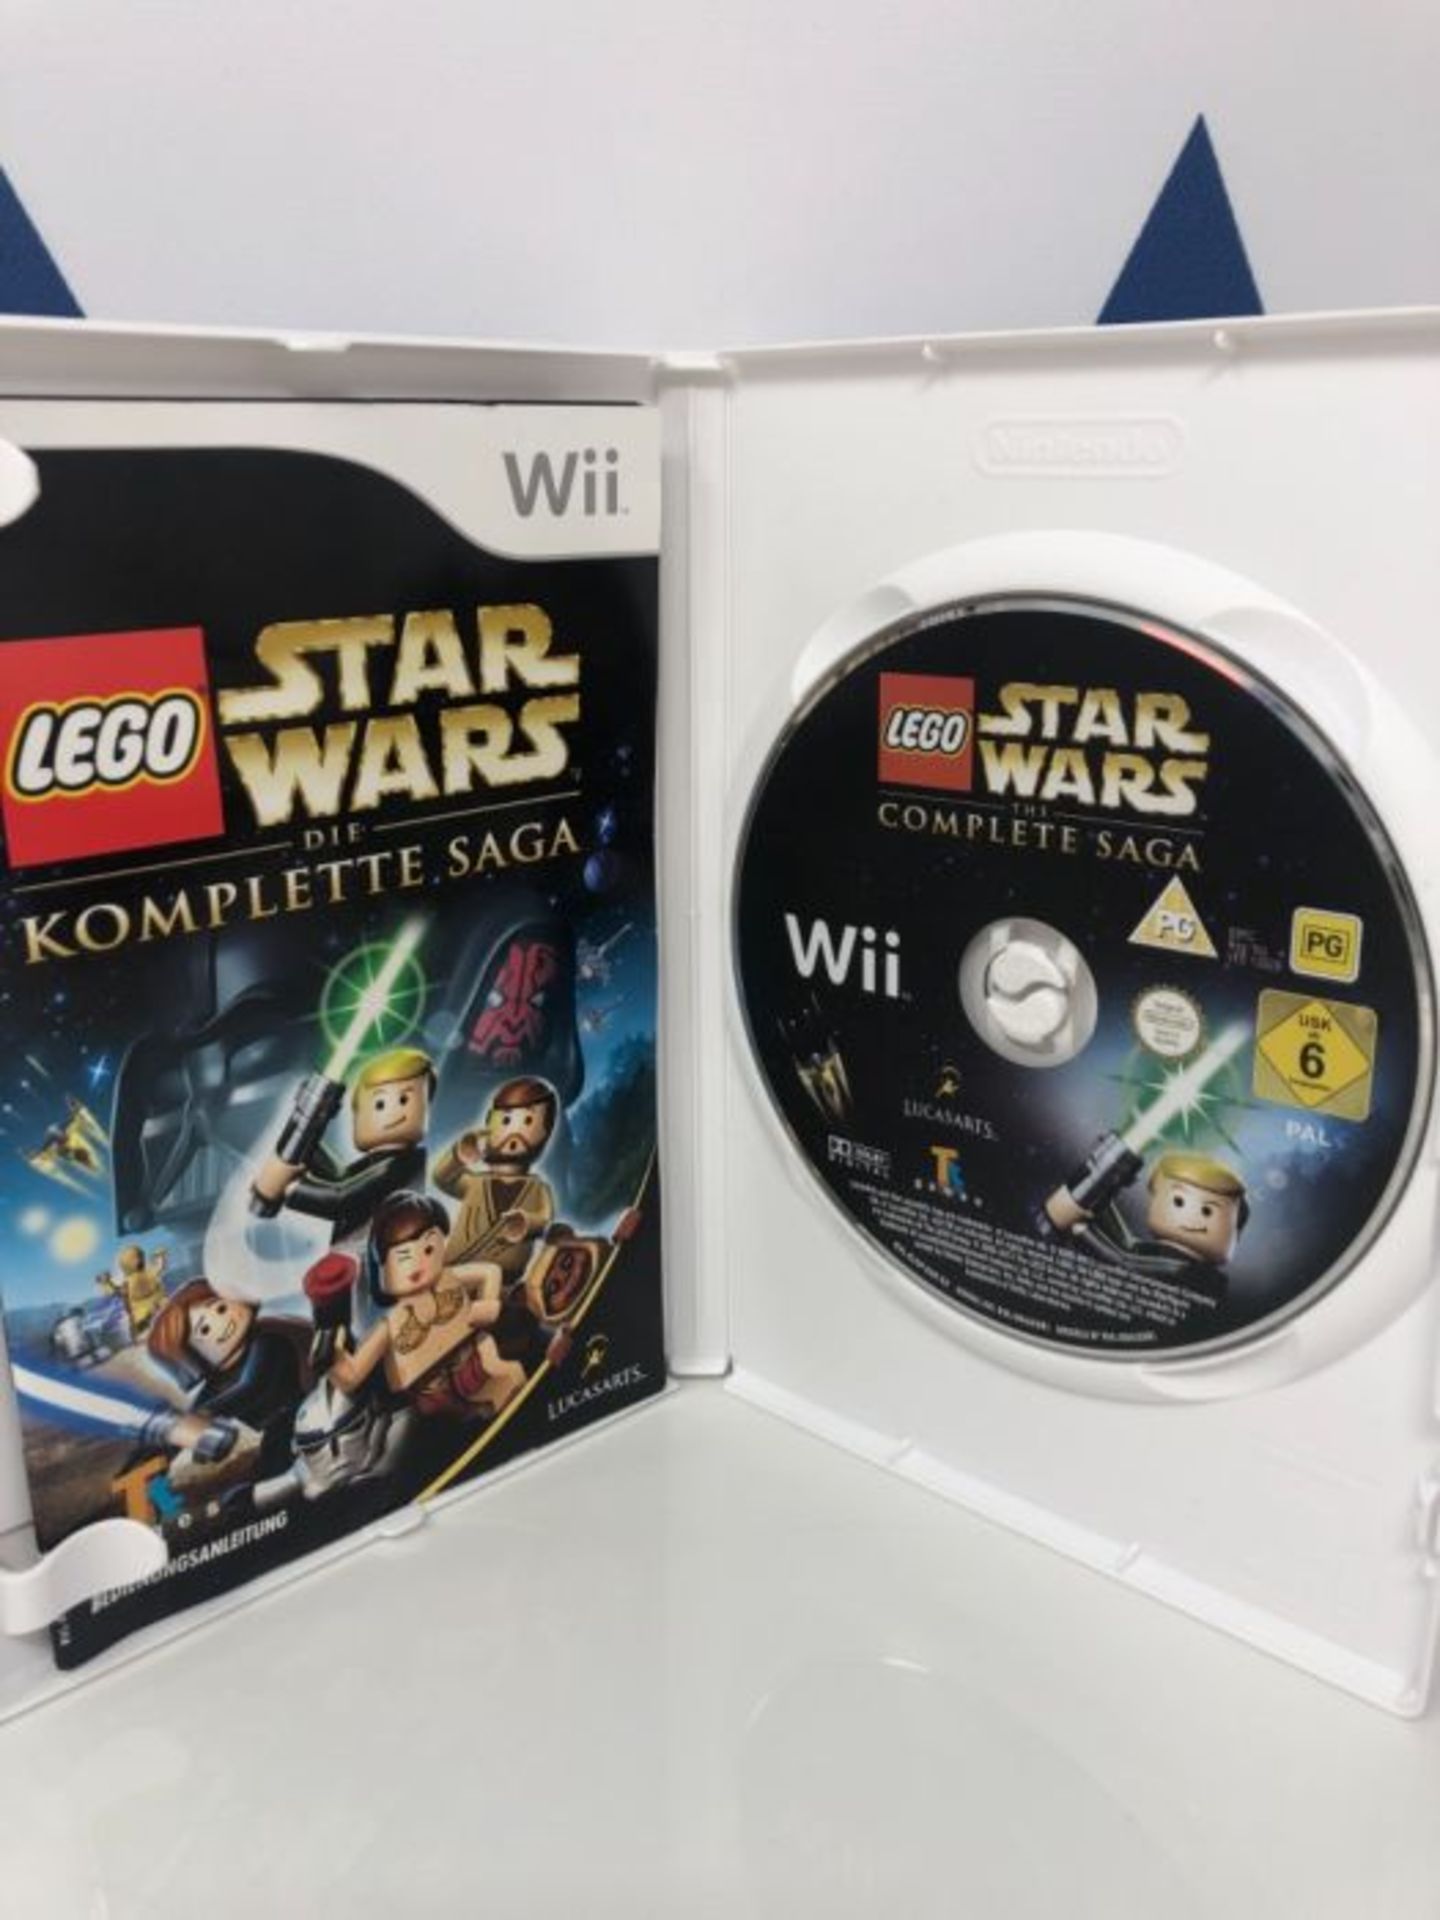 Software Pyramide Wii Lego Star Wars - Image 3 of 3